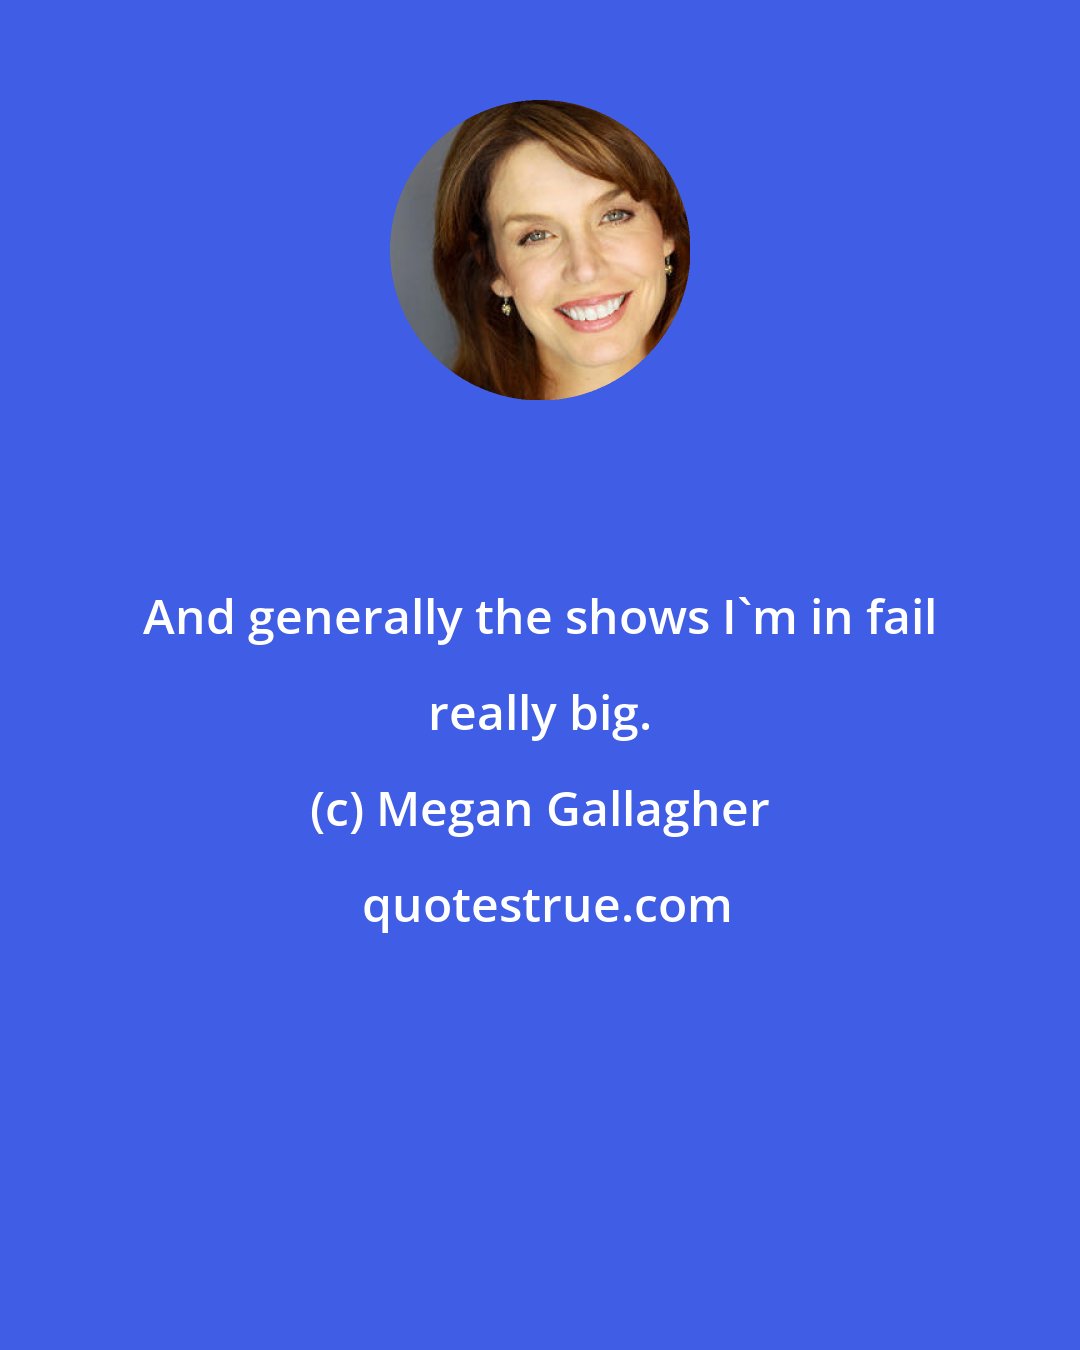 Megan Gallagher: And generally the shows I'm in fail really big.